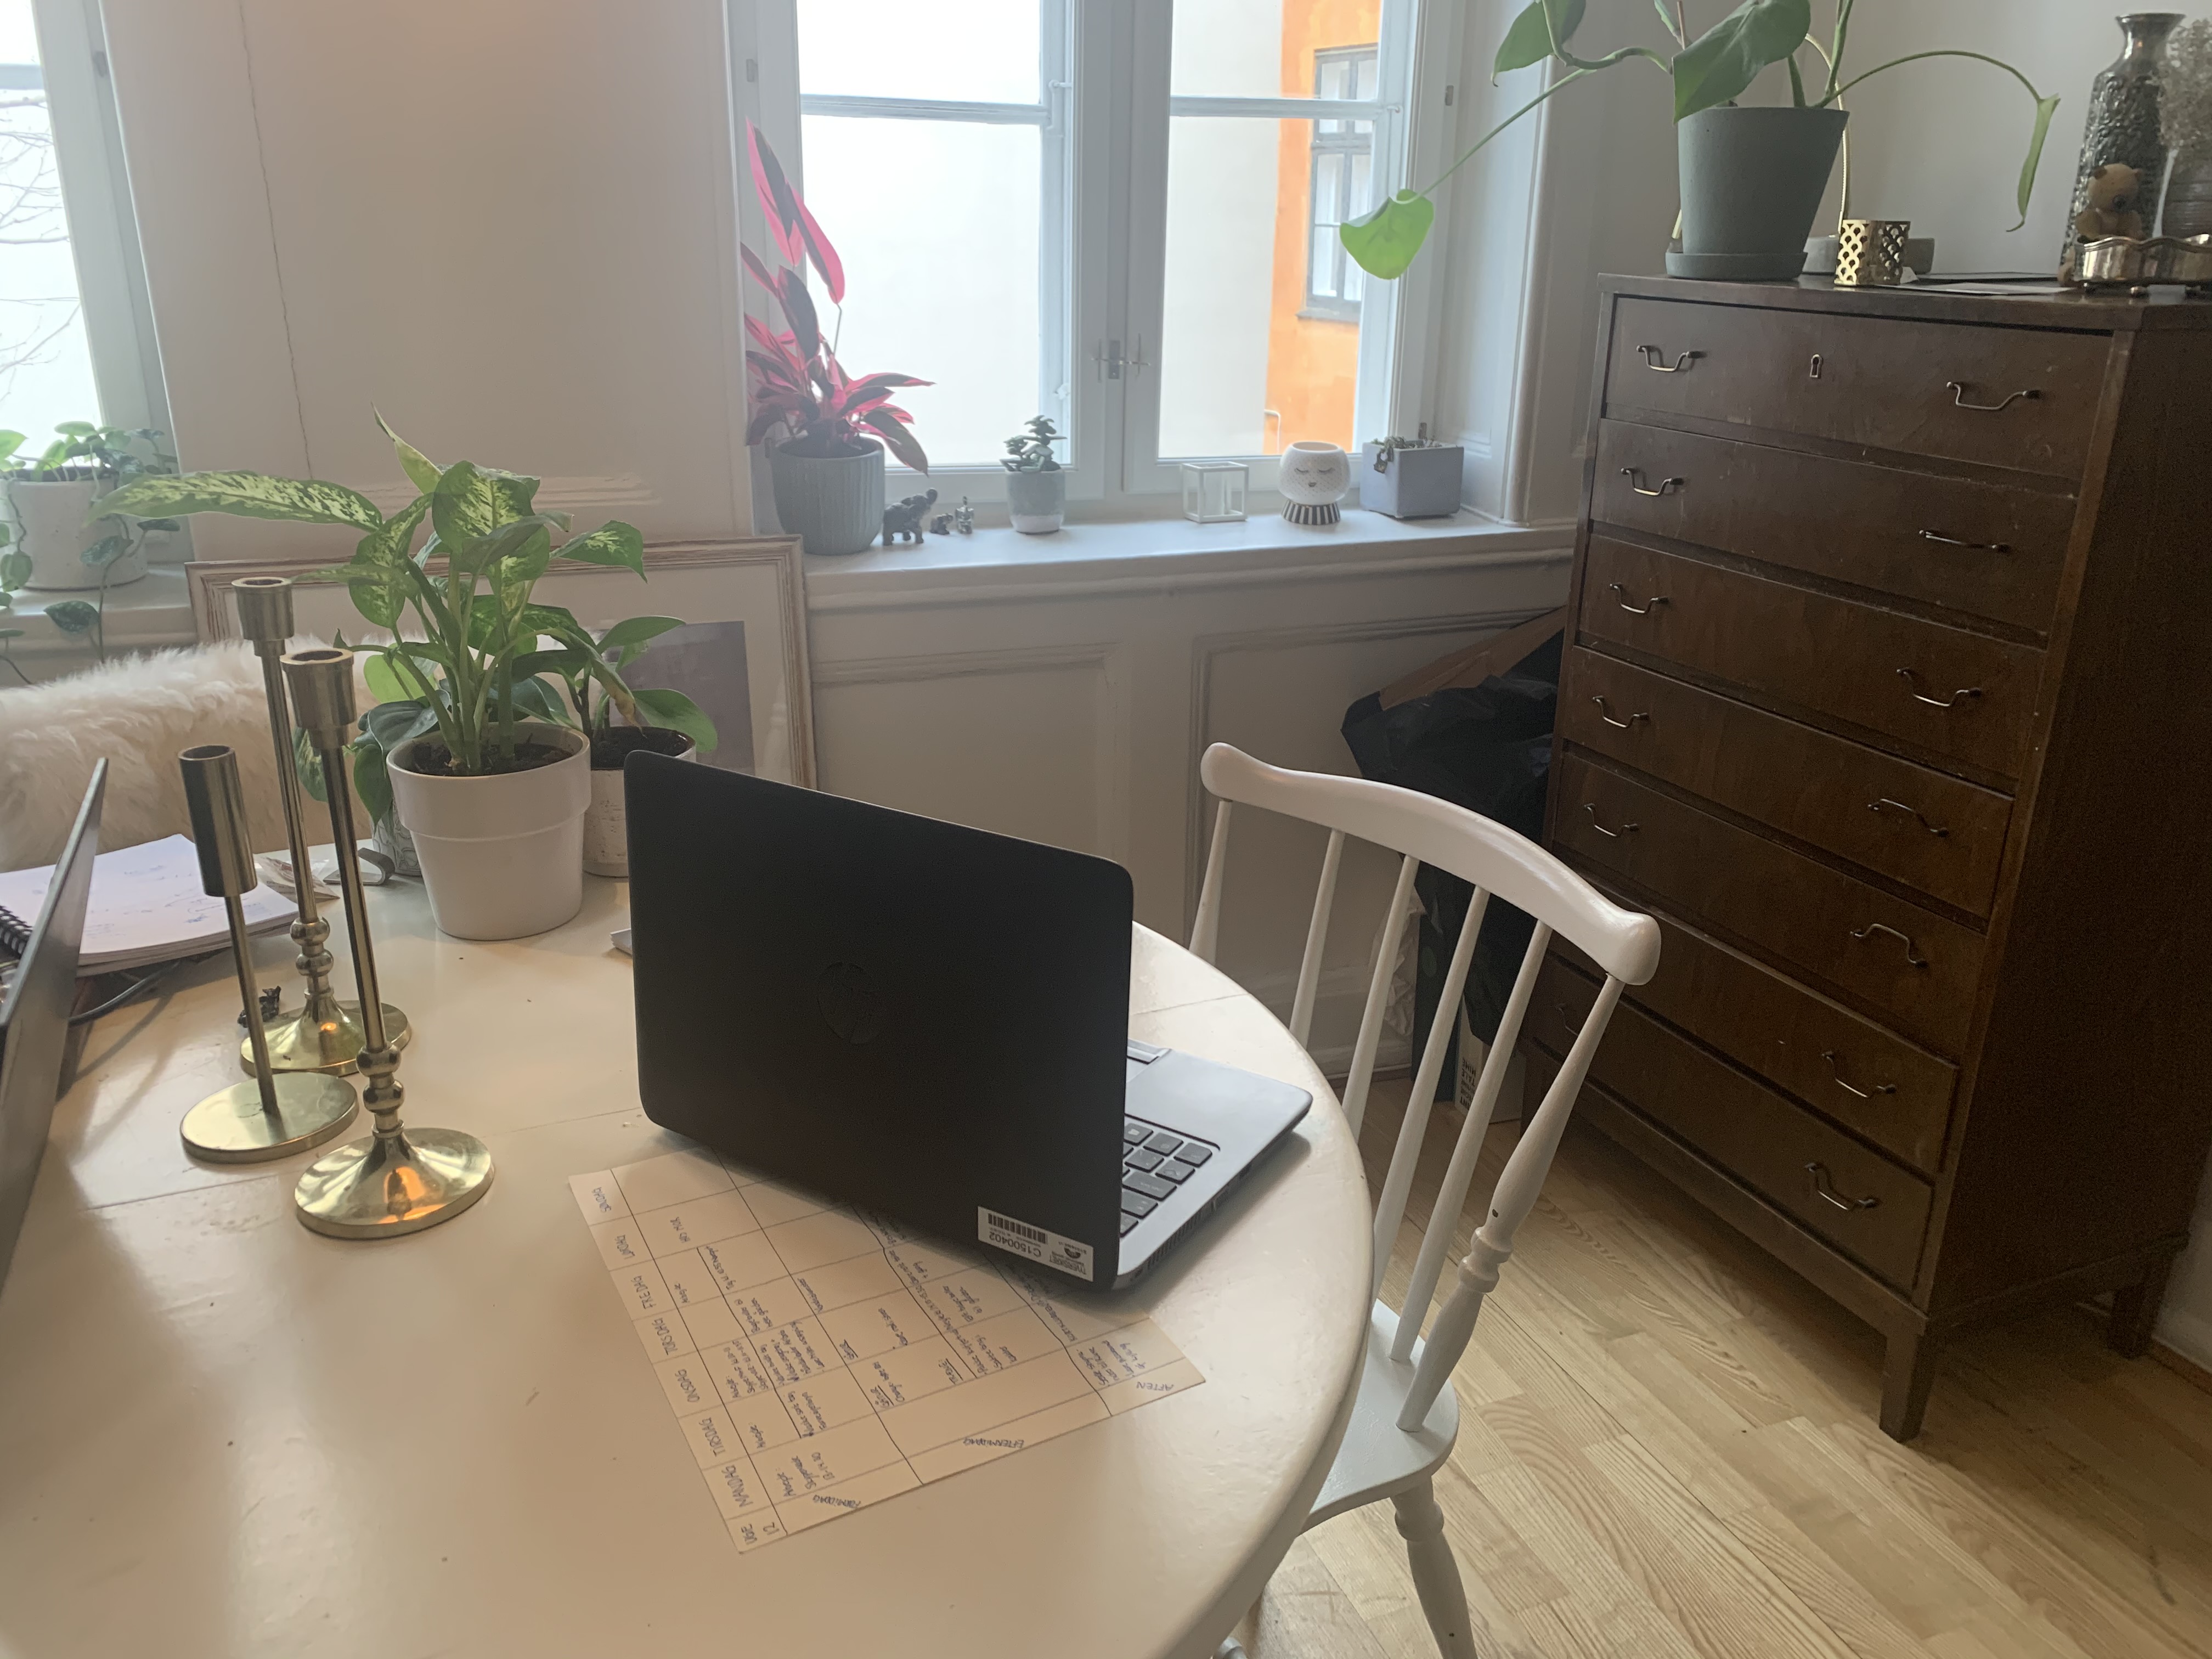 The employees at the Danish National ID Centre is working from home